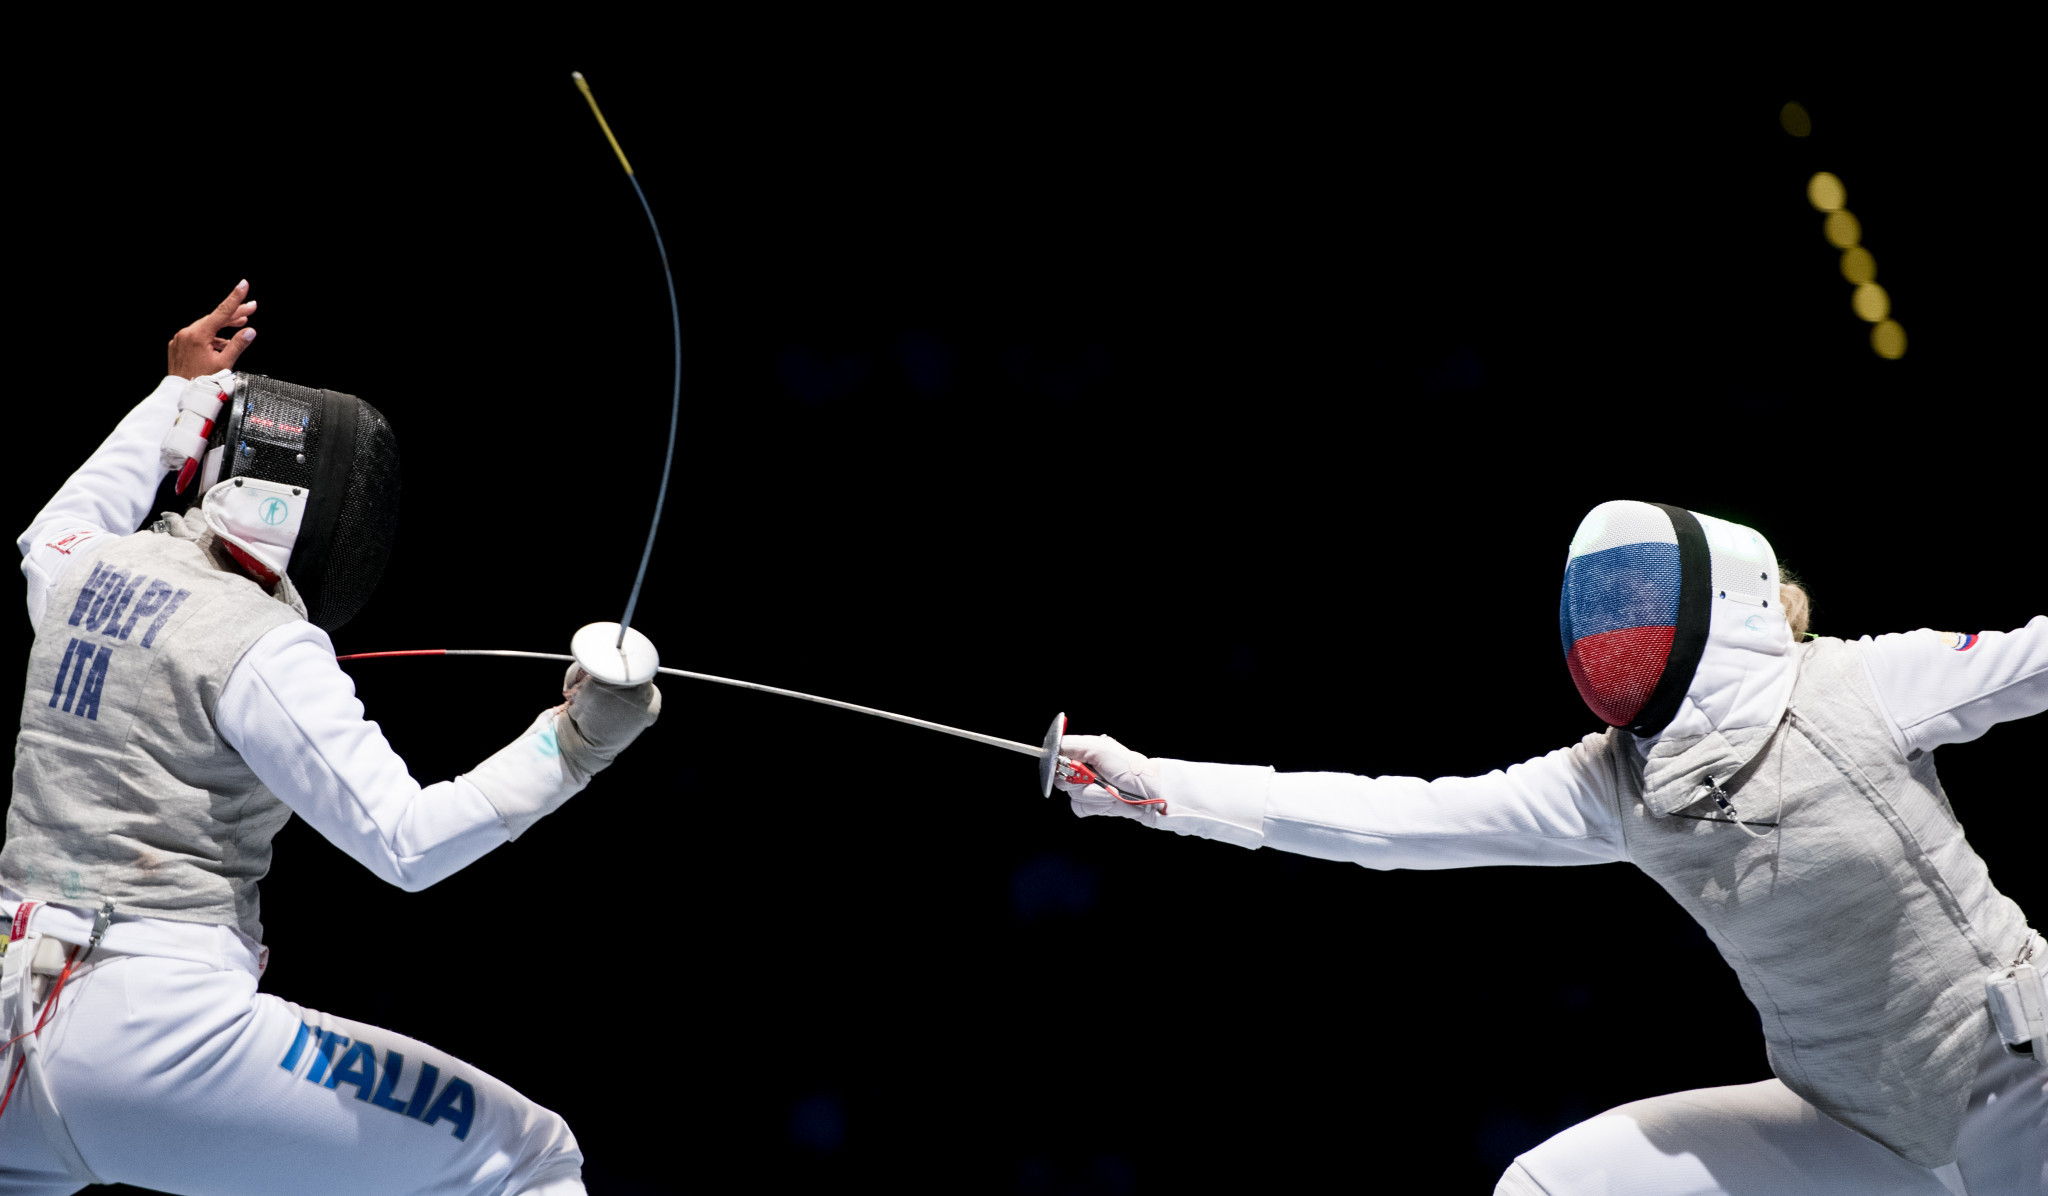 Russia's Inna Deriglazova is the top-ranked fencer in the women's event ©Getty Images